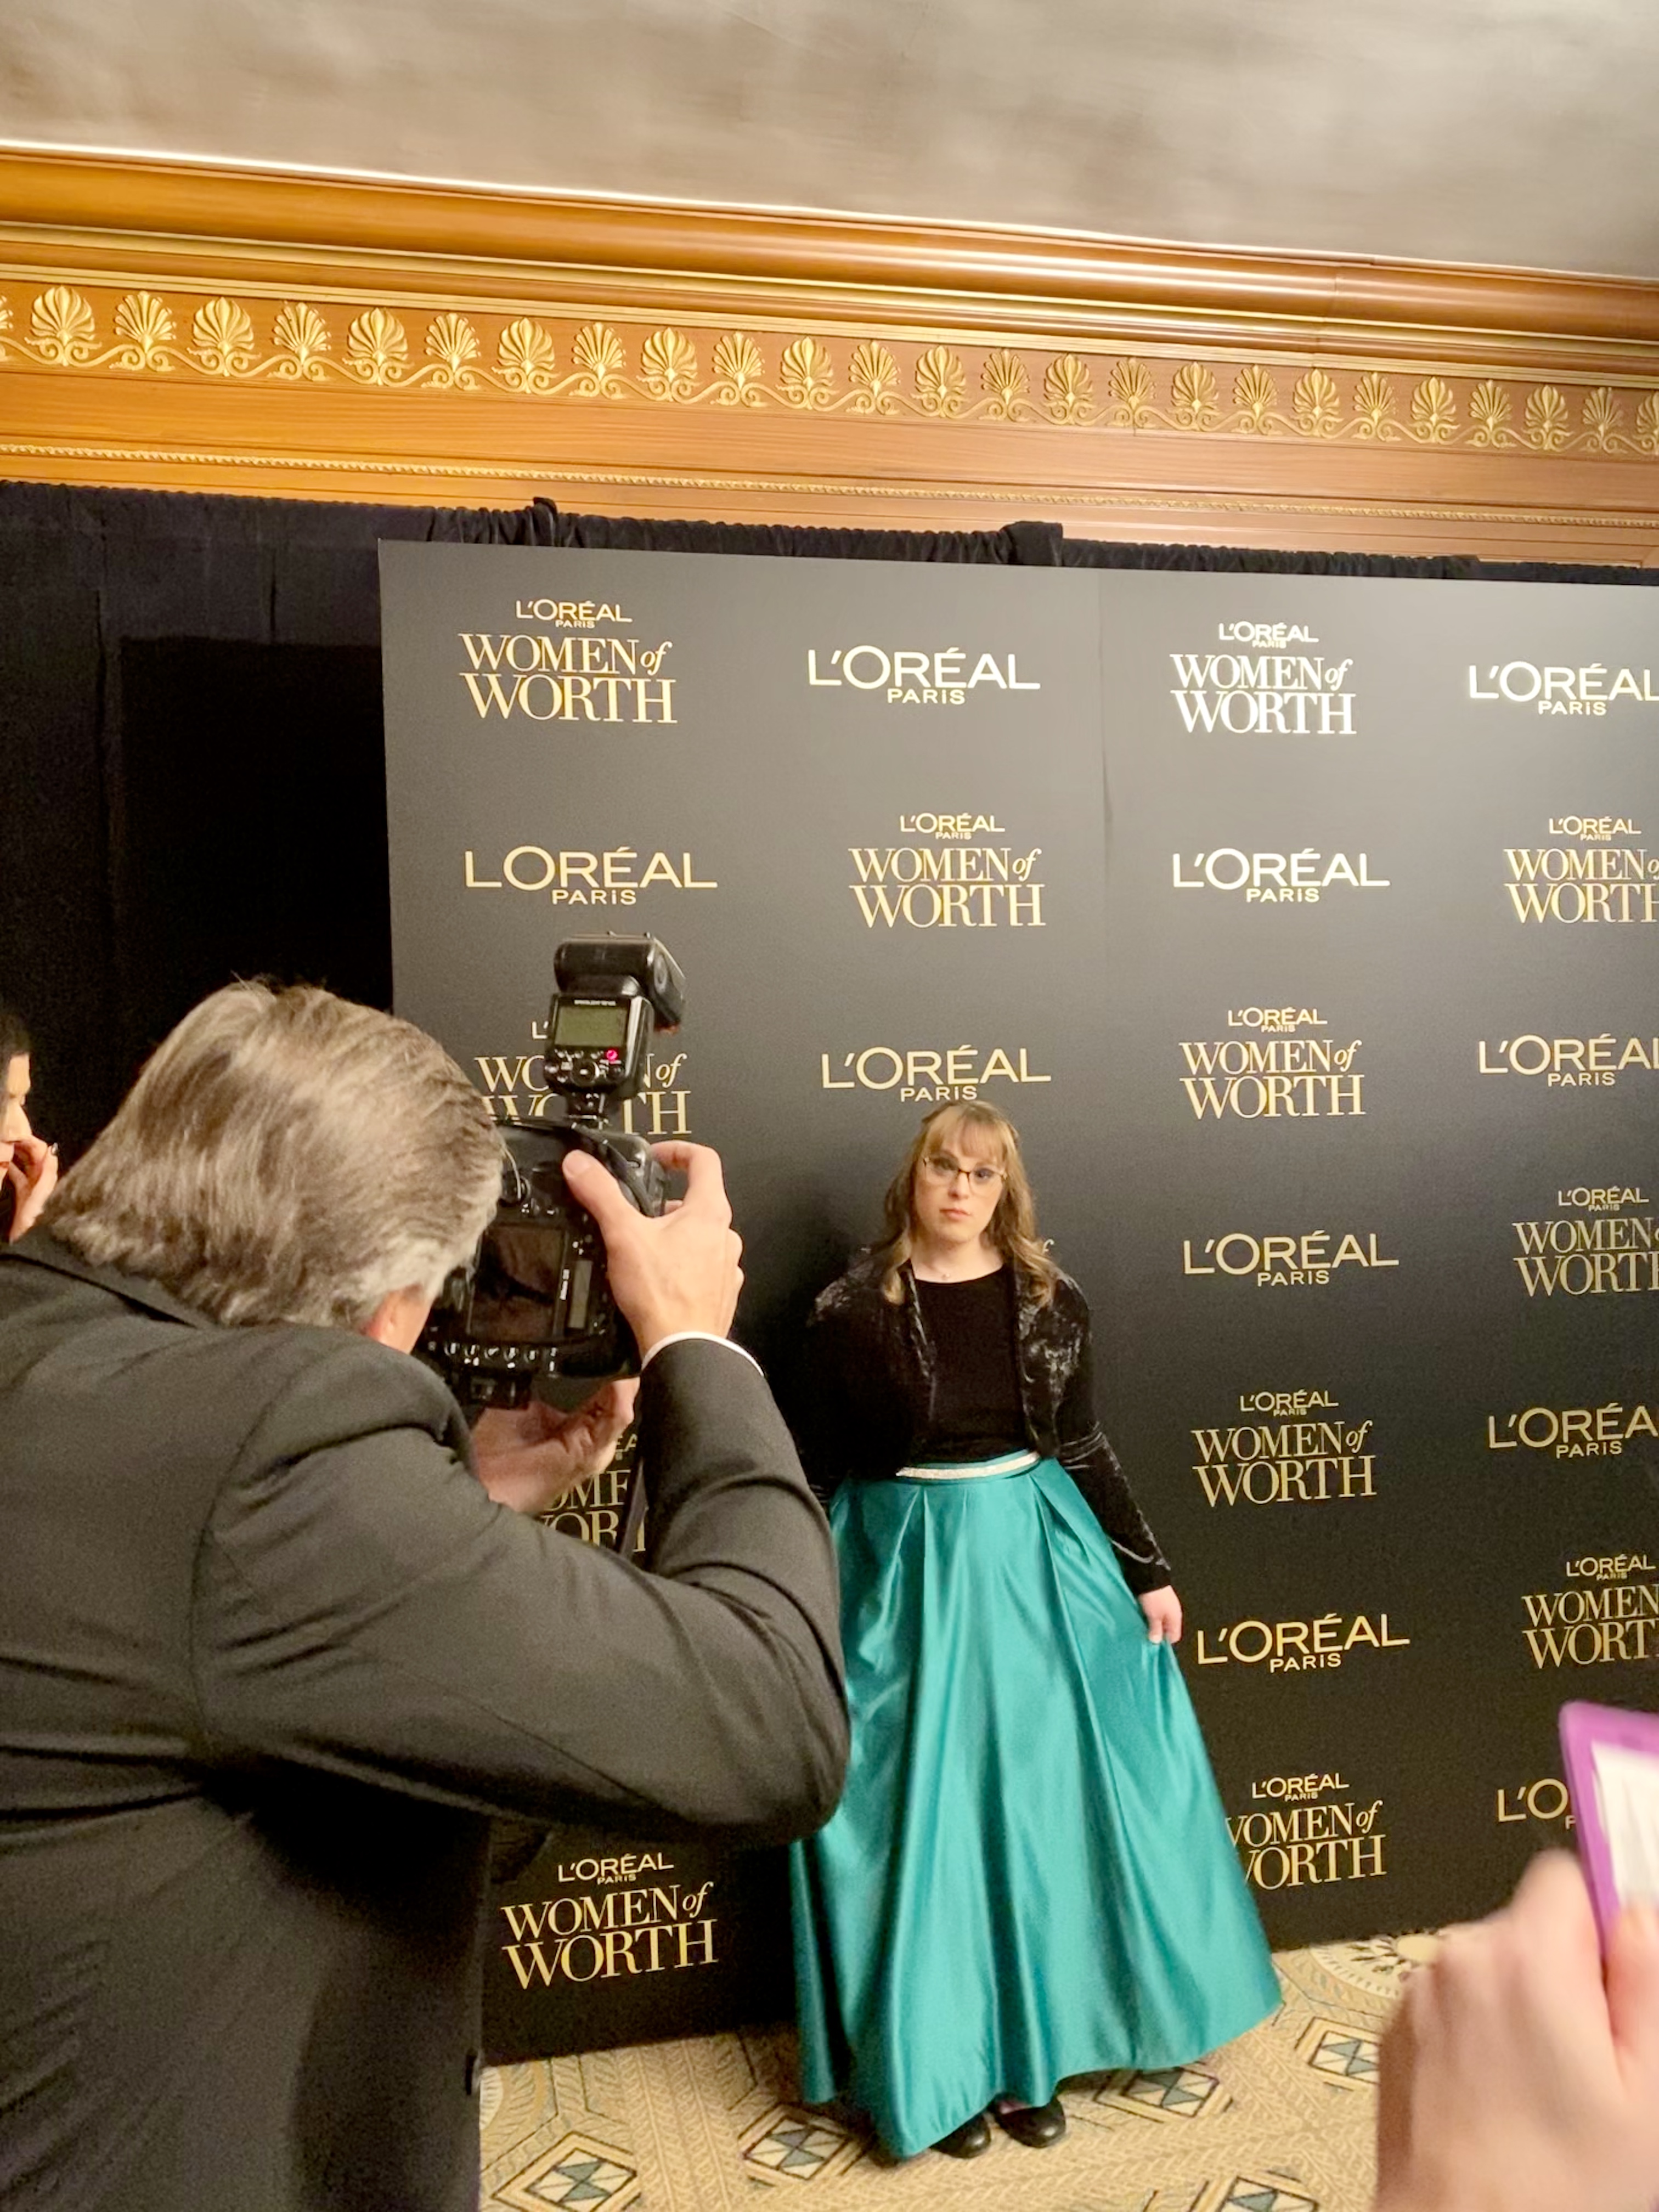 Brittany being photographed at the gala.